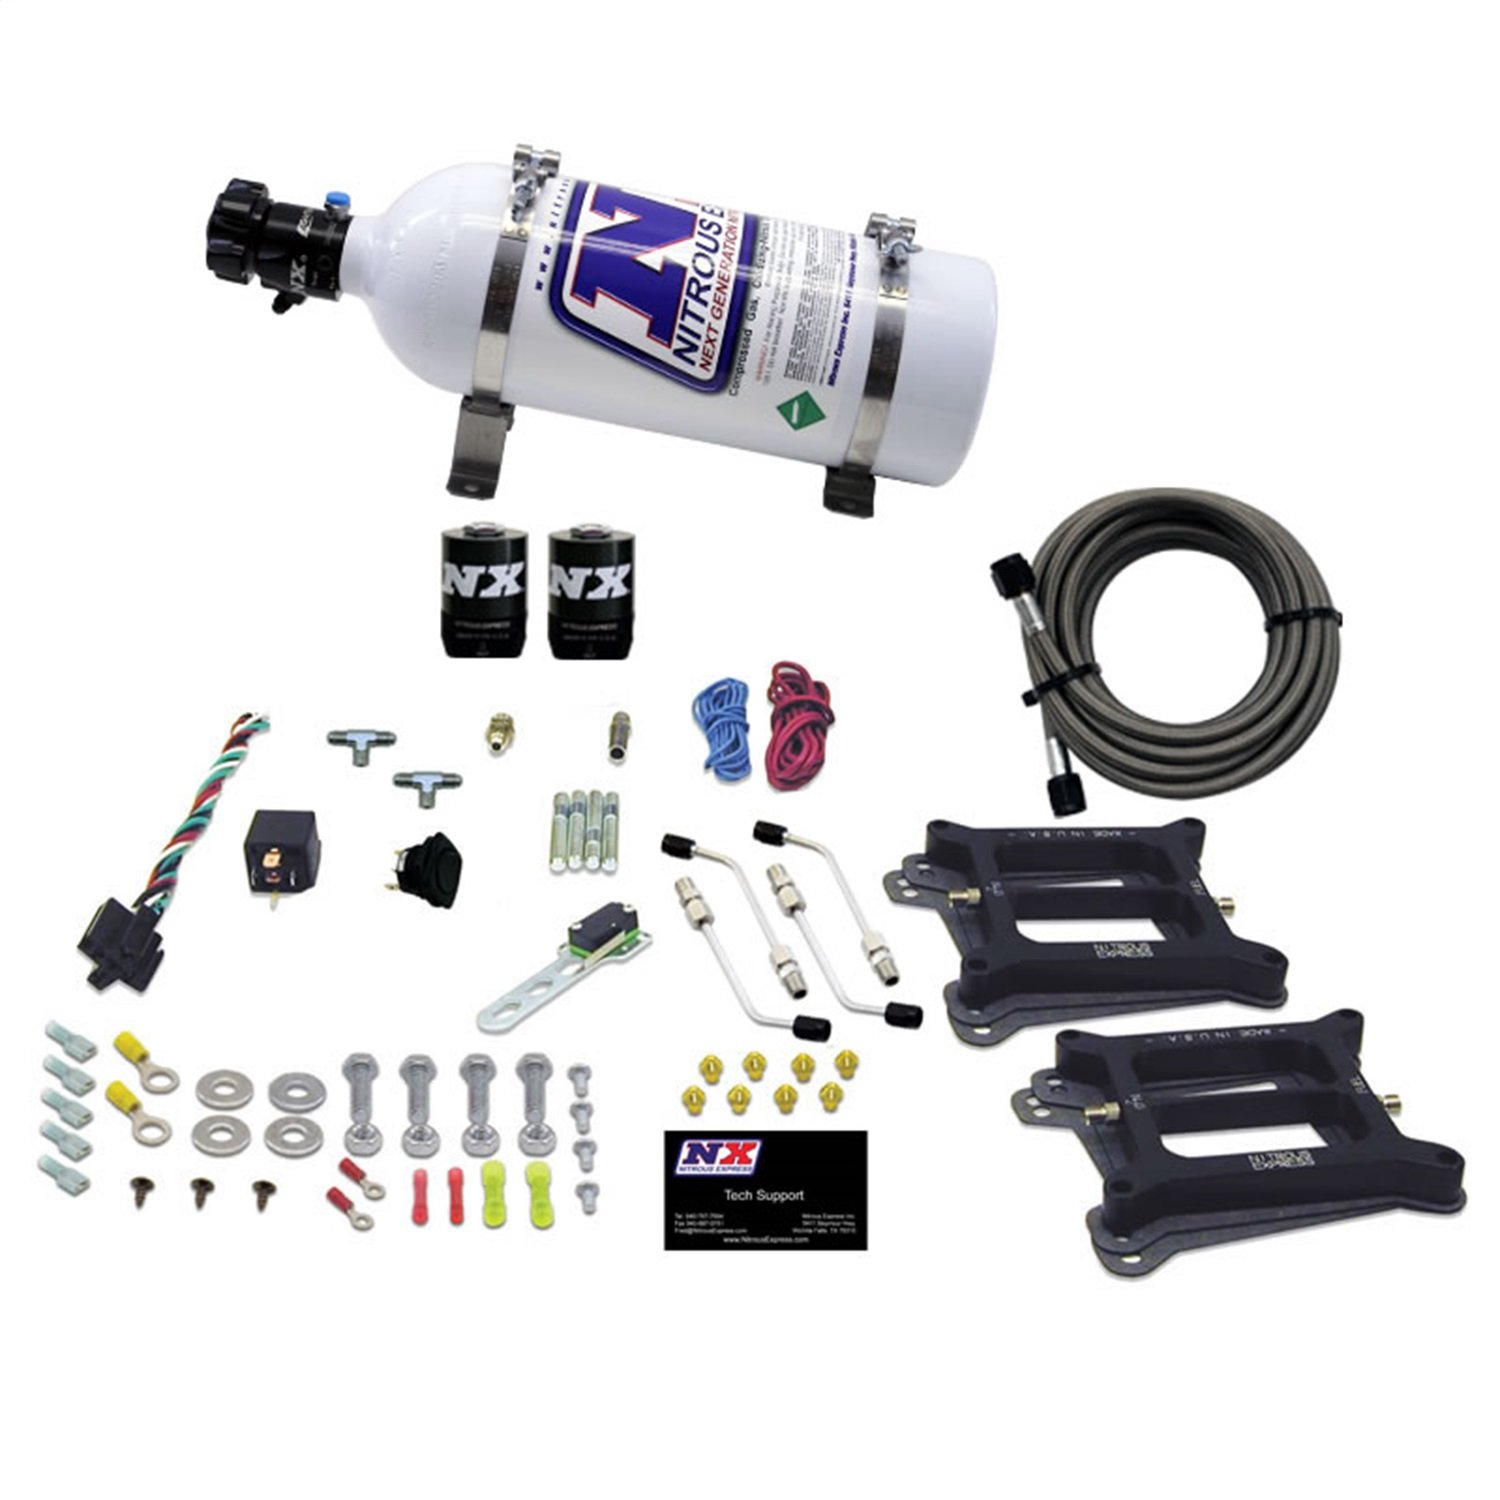 Conventional Stage 6 Nitrous Plate System Dual Holley 4150 Carb Spray Plates